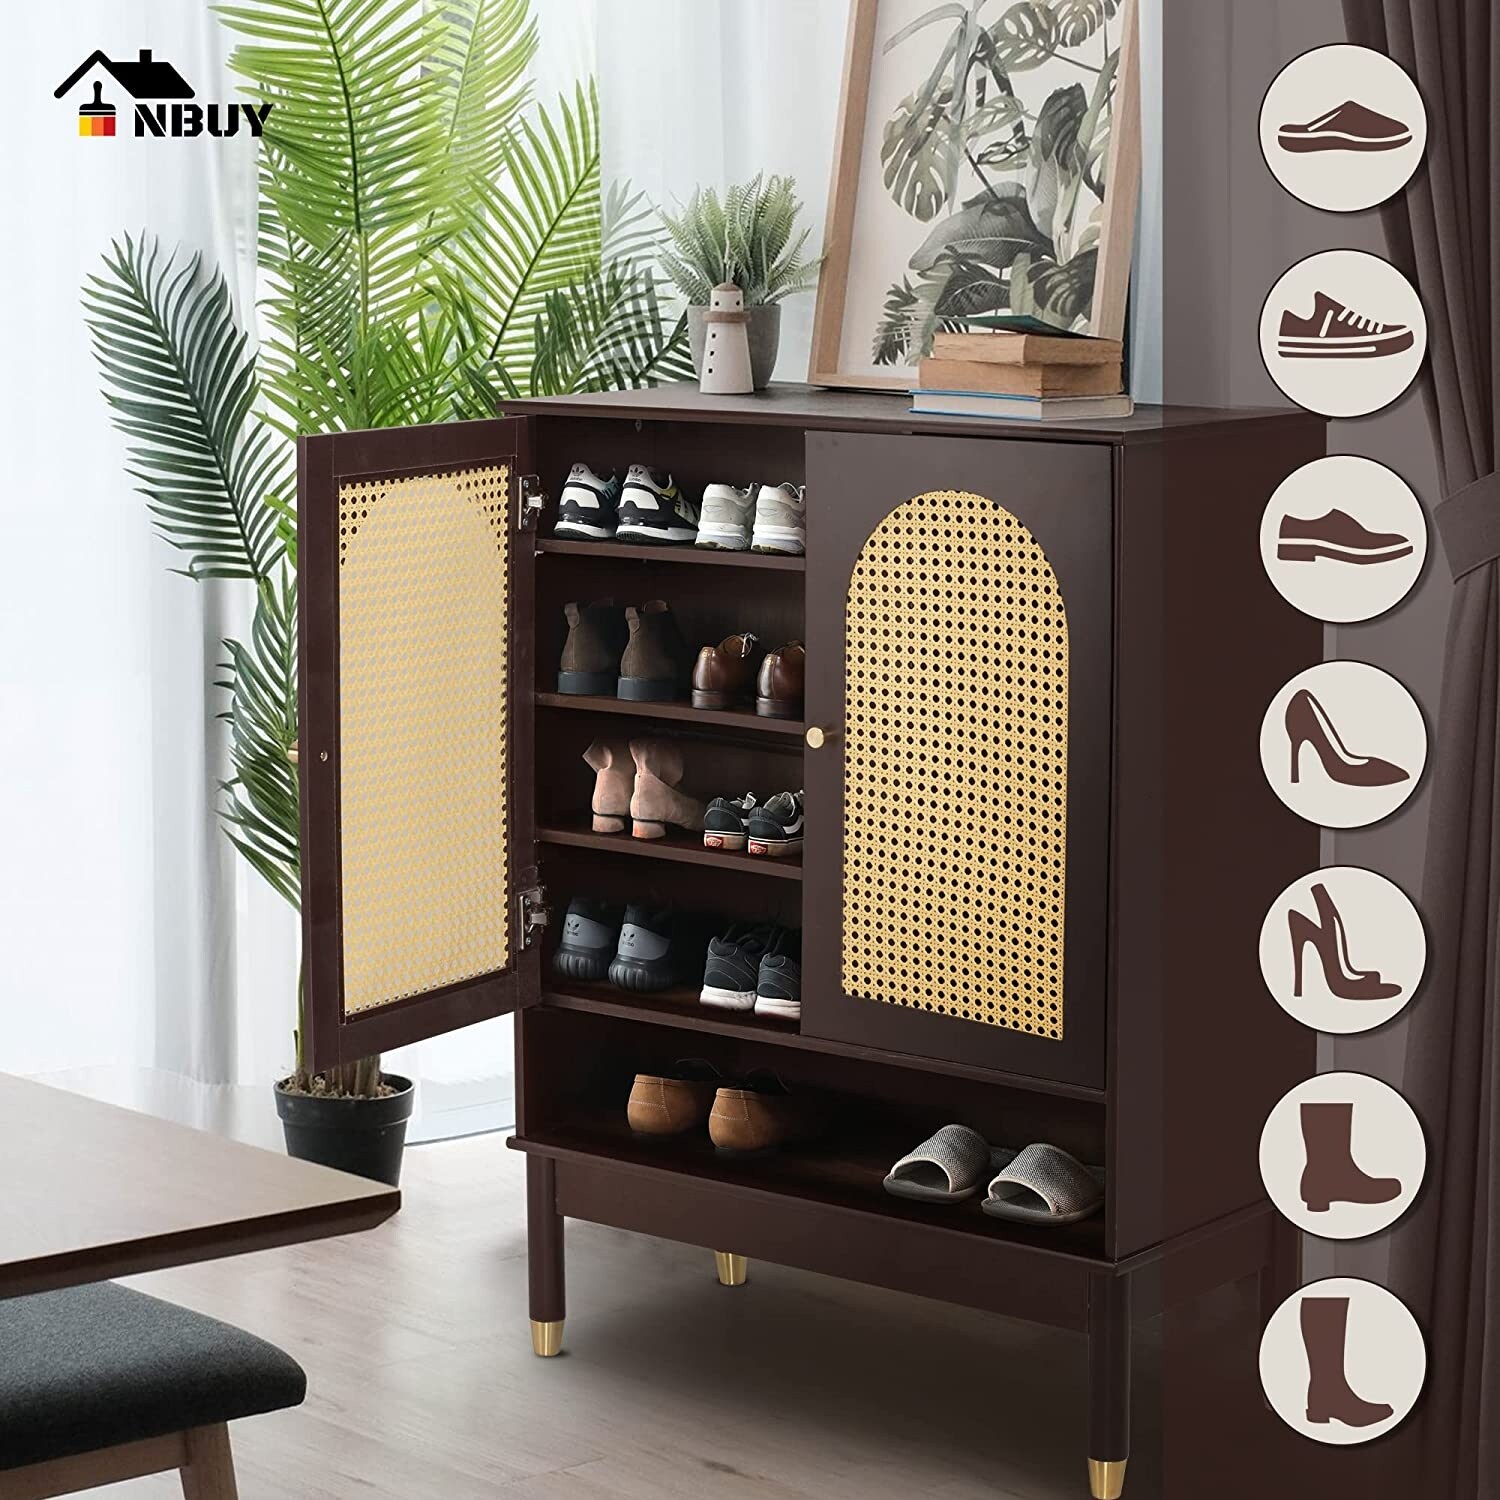 https://ak1.ostkcdn.com/images/products/is/images/direct/aa42aab85380fb9ab0b75741eff2e1d4569d1554/Narrow-Shoes-Cabinet-Cabinet-PE-Rattan-Style.jpg